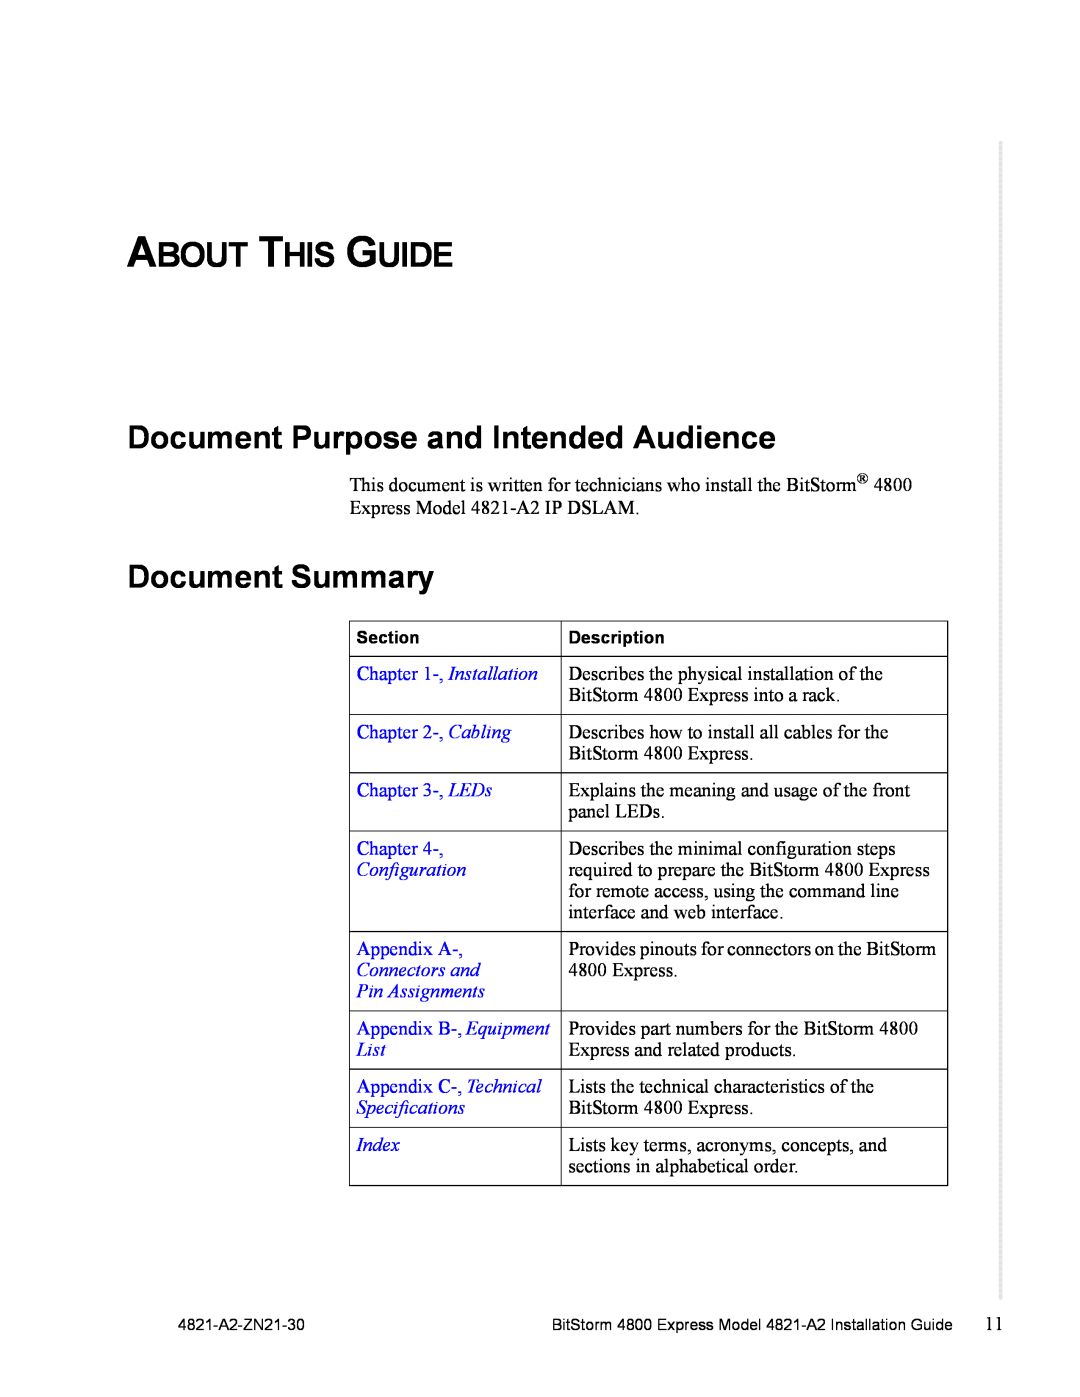 Zhone Technologies 4821-A2 About This Guide, Document Purpose and Intended Audience, Document Summary, Configuration, List 